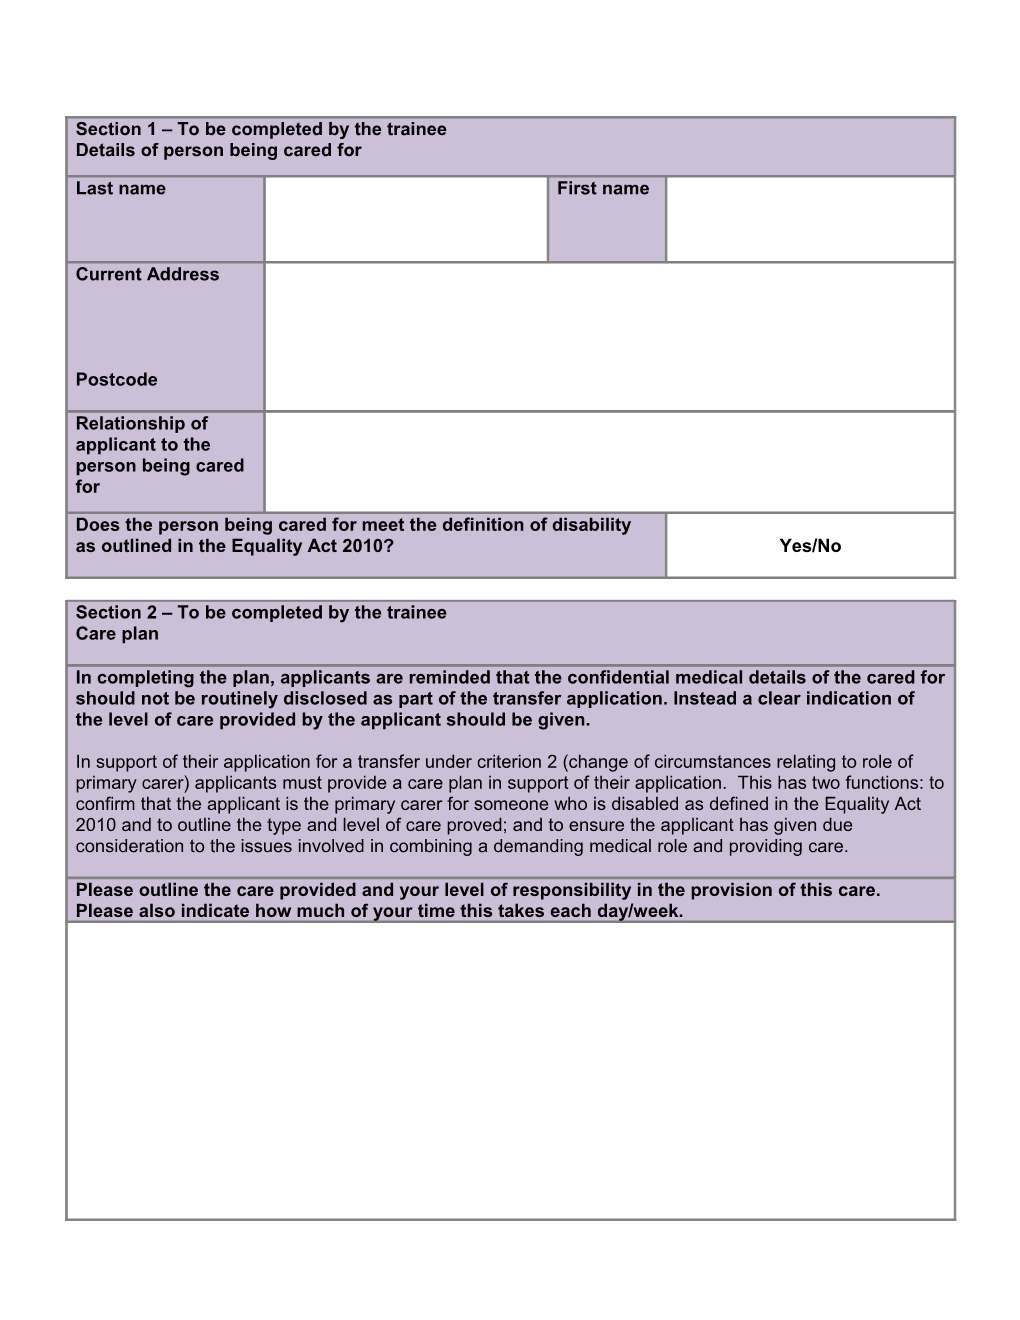 Please Ensure You Have Read the Process and Guidance Document Before Completing This Form